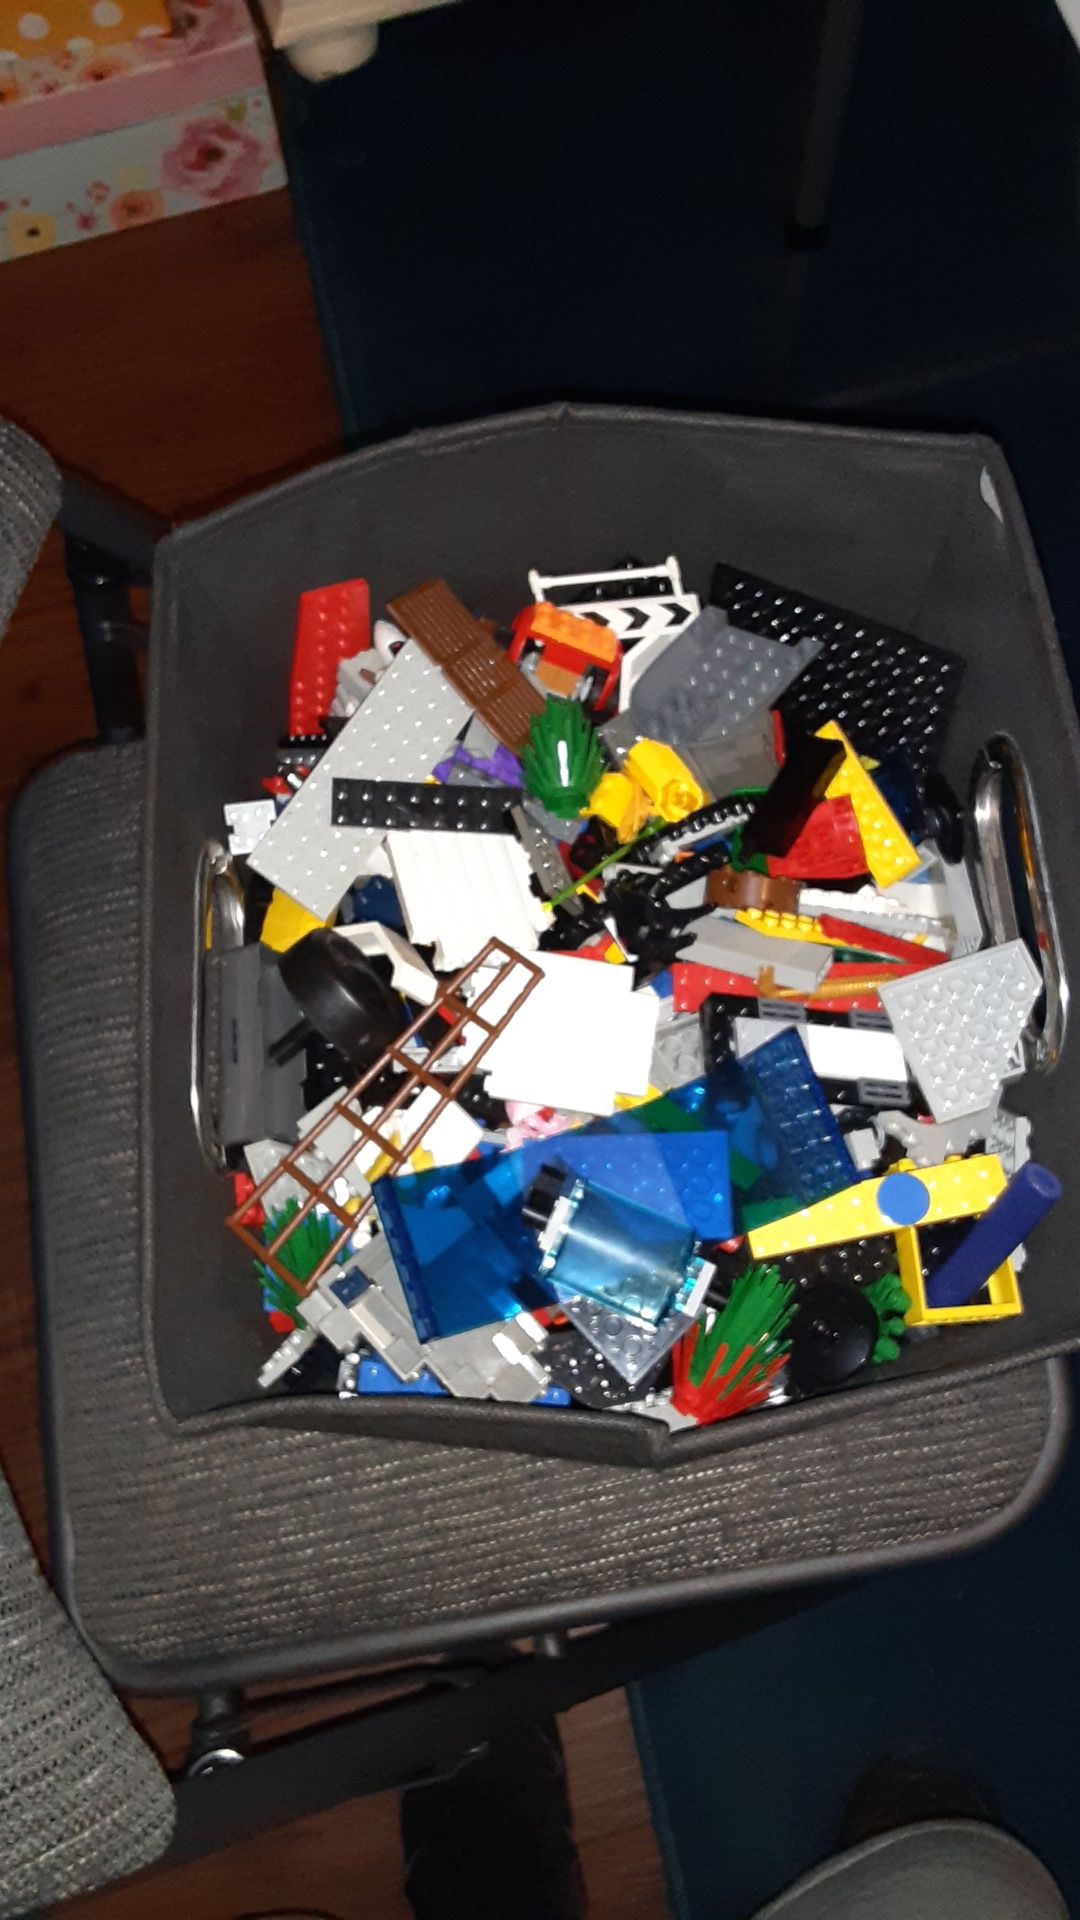 1 or 2 pounds of Lego toys ( must be 6+ older to us )